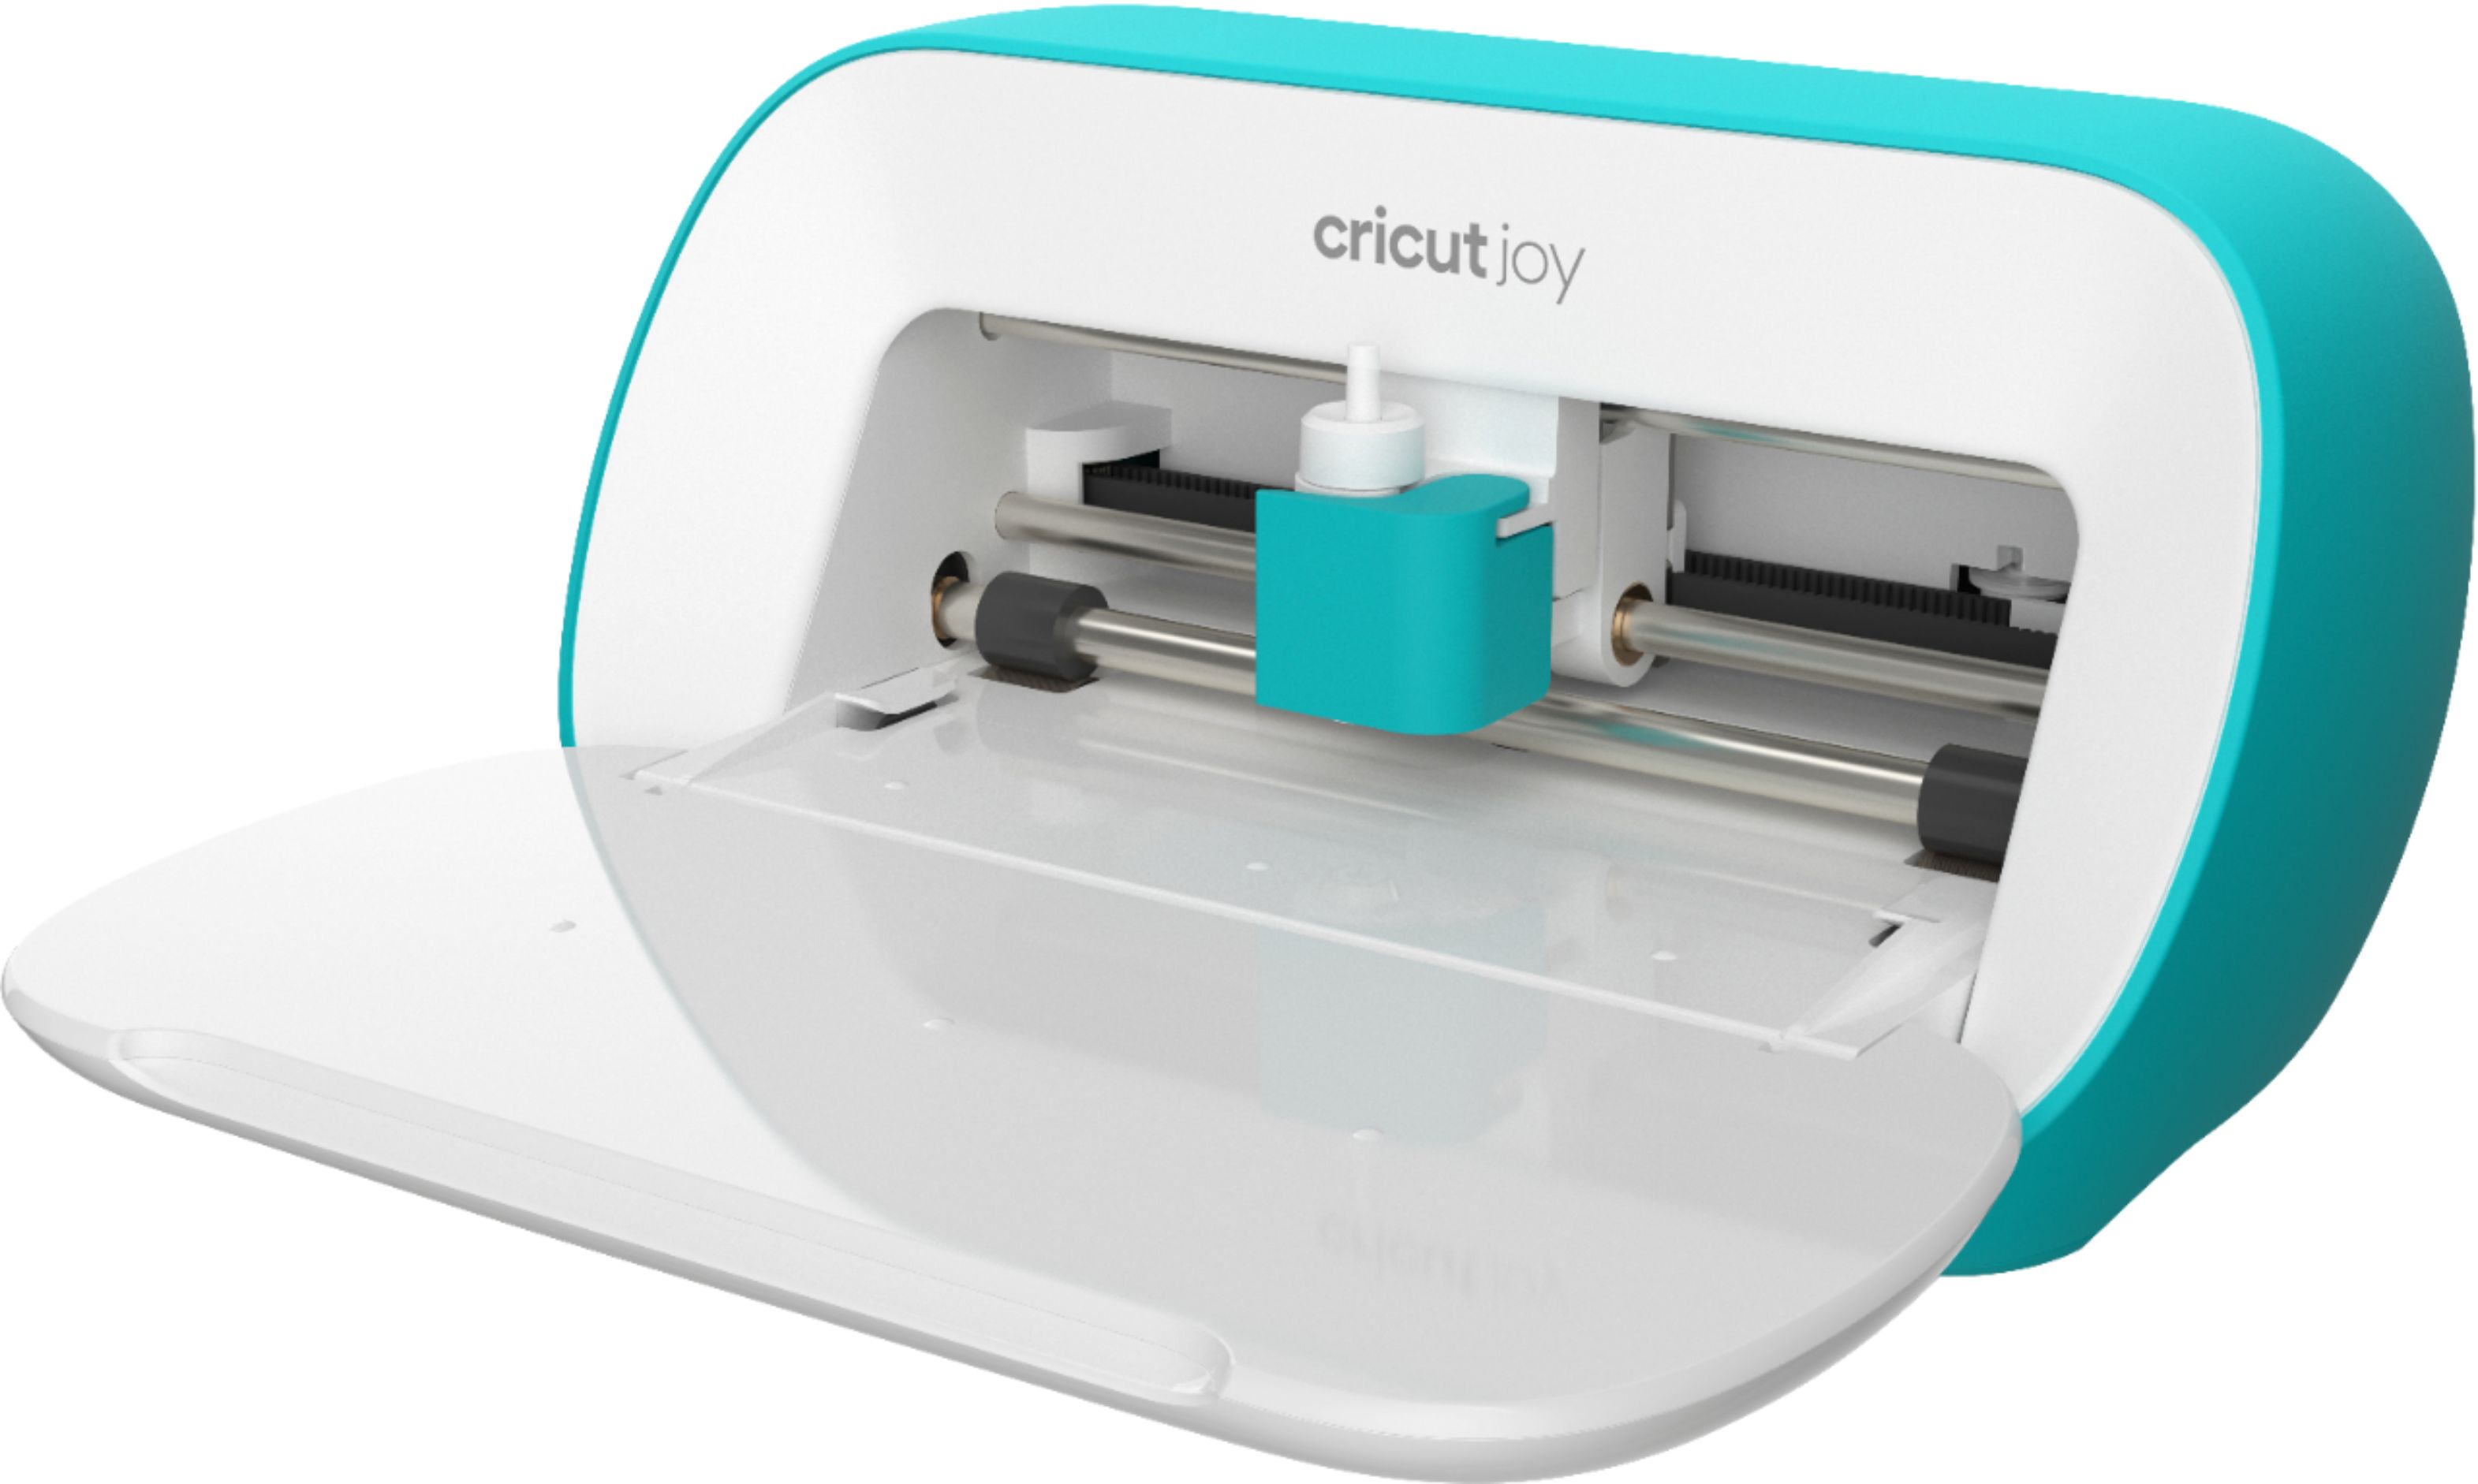 Cricut joy bran new with accessories - arts & crafts - by owner - sale -  craigslist